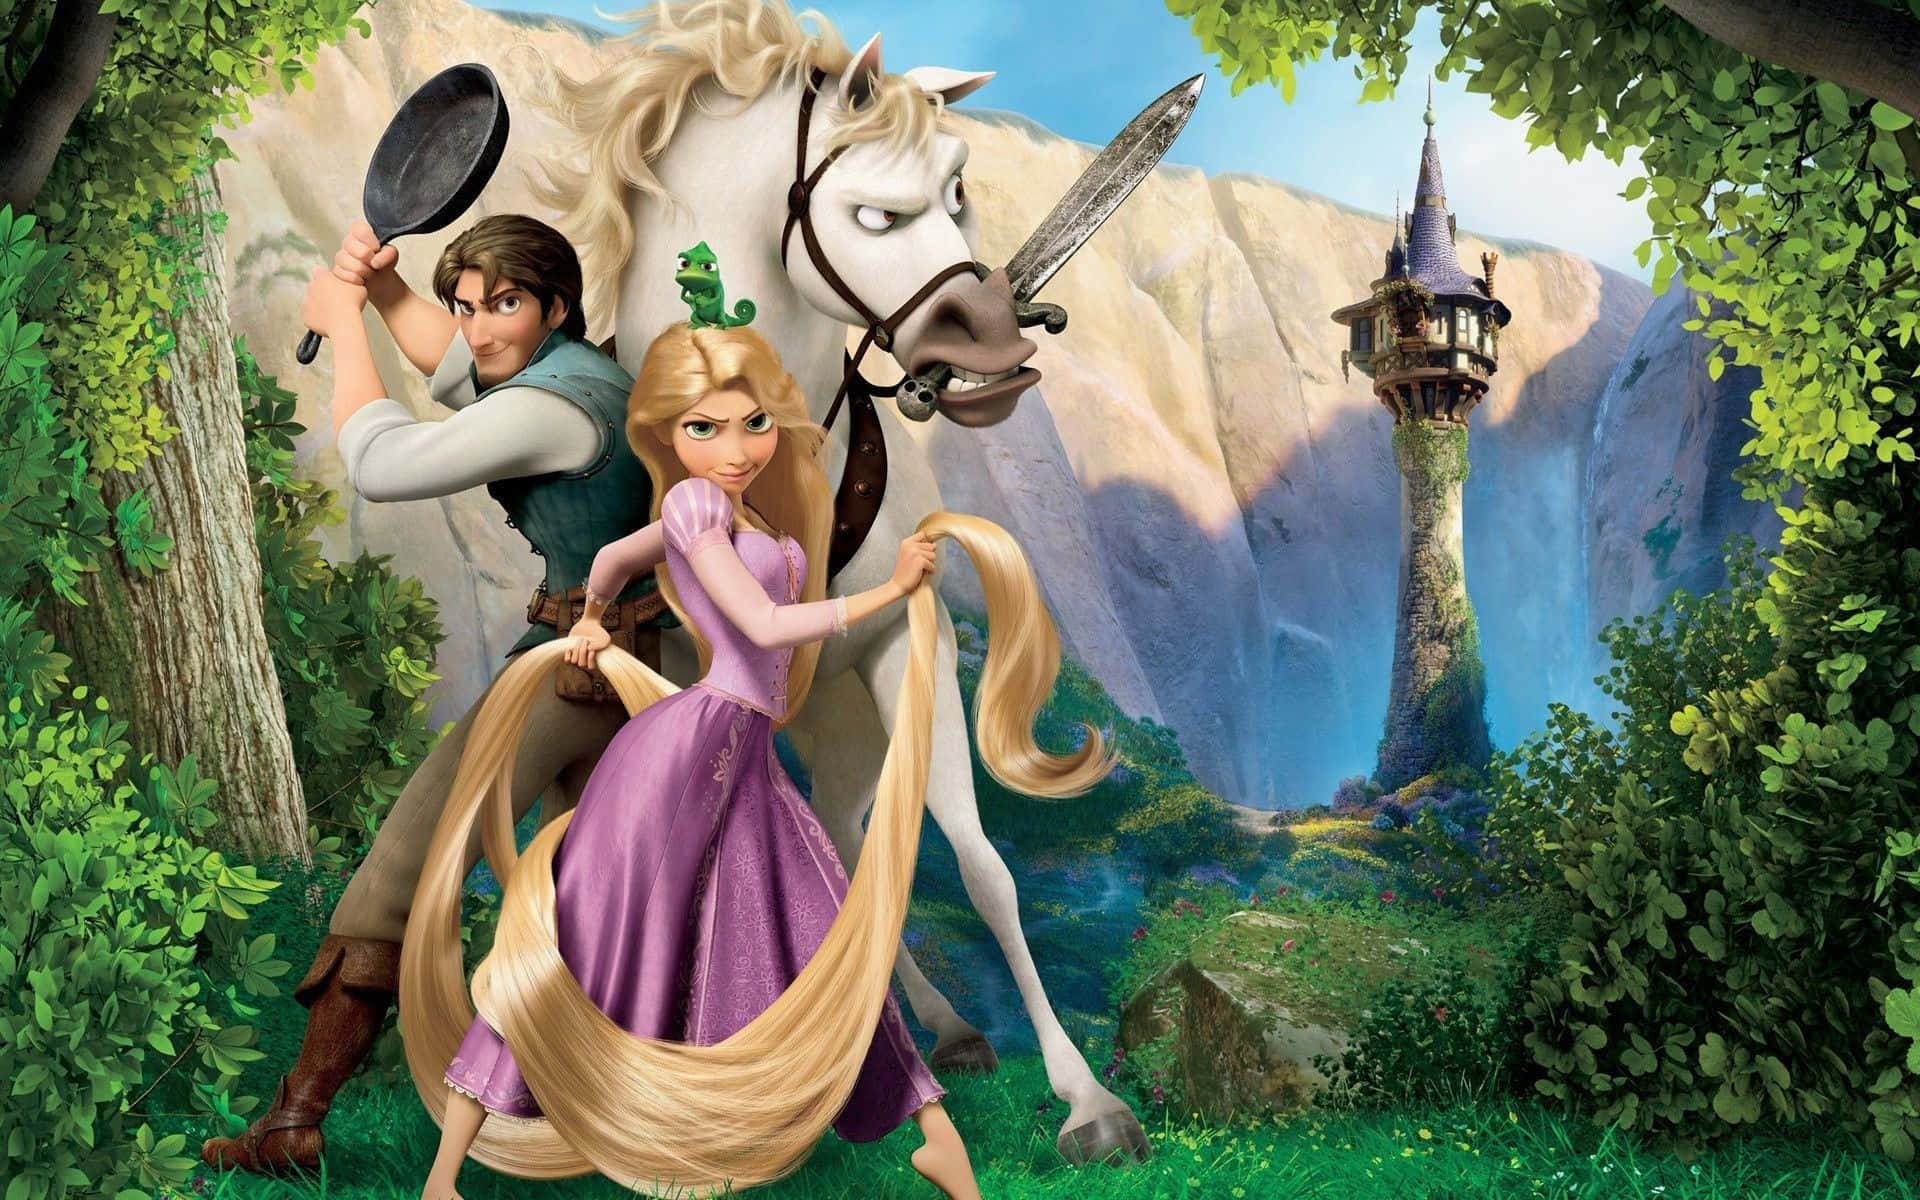 Flynn Rider and Rapunzel, the two main characters of Disney Tangled, set out on their adventure together